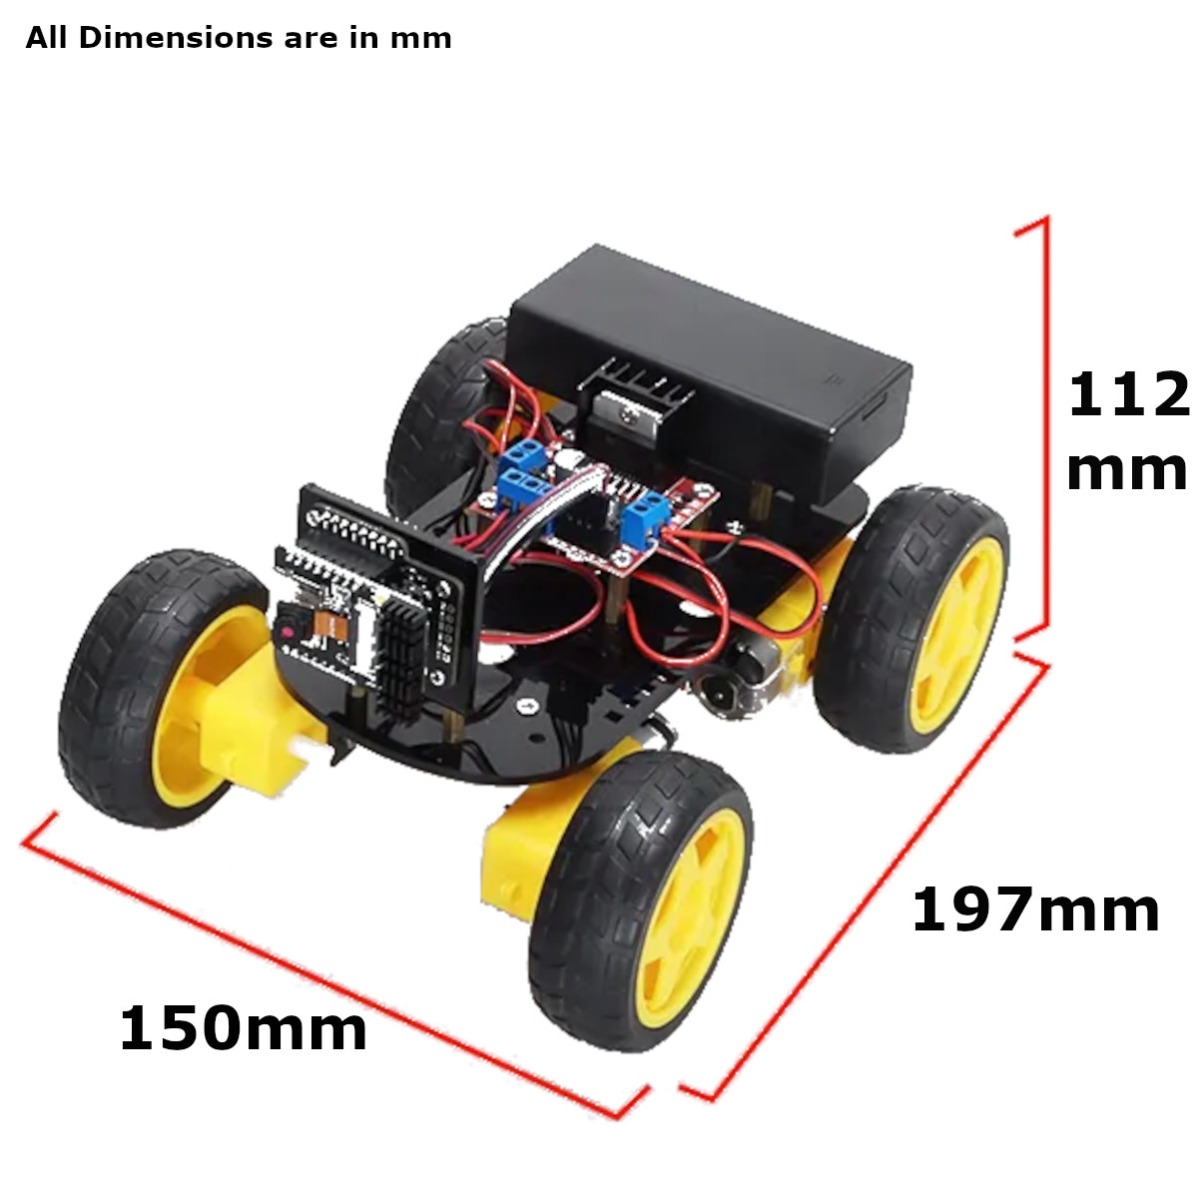 WIFI Video Robot Car Open Source ESP32 Car with Camera Programming DIY STEM  Toy Kits Cheap - Realistic Reborn Dolls for Sale